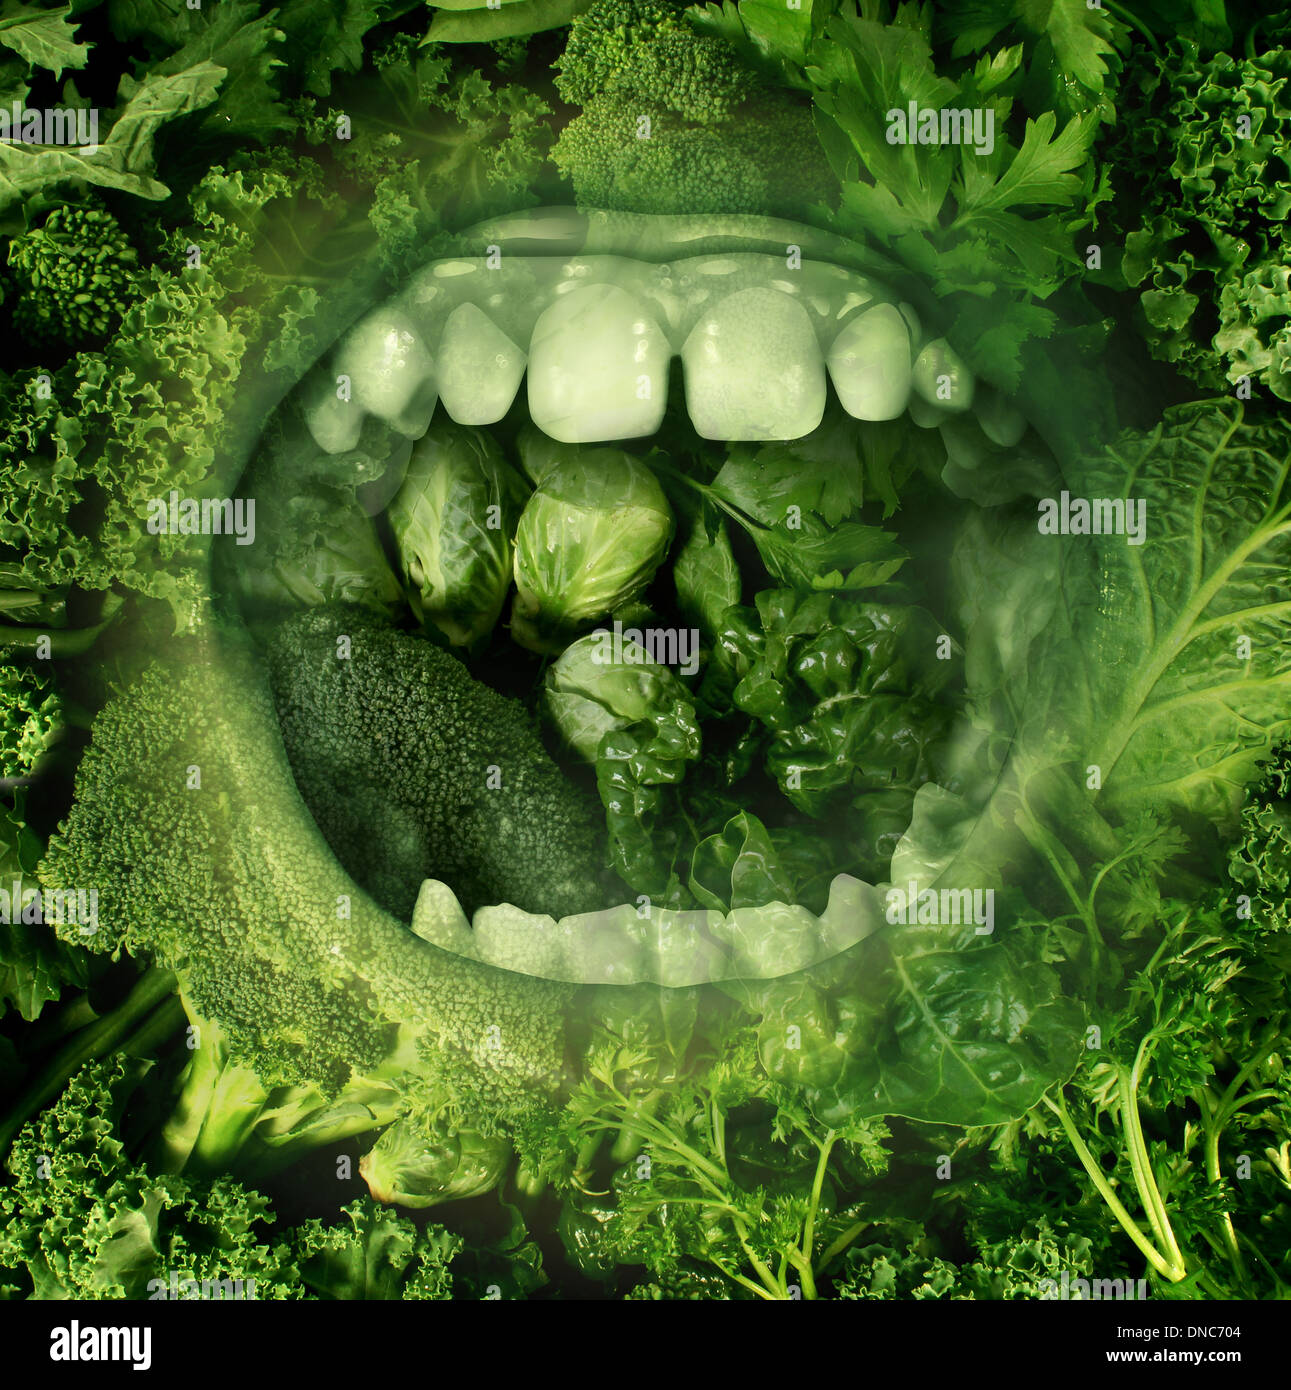 Eating green and healthy food concept with an open human mouth on a background of produce eating fresh vegetables as a symbol of good diet and nutrition and living a health lifestyle. Stock Photo